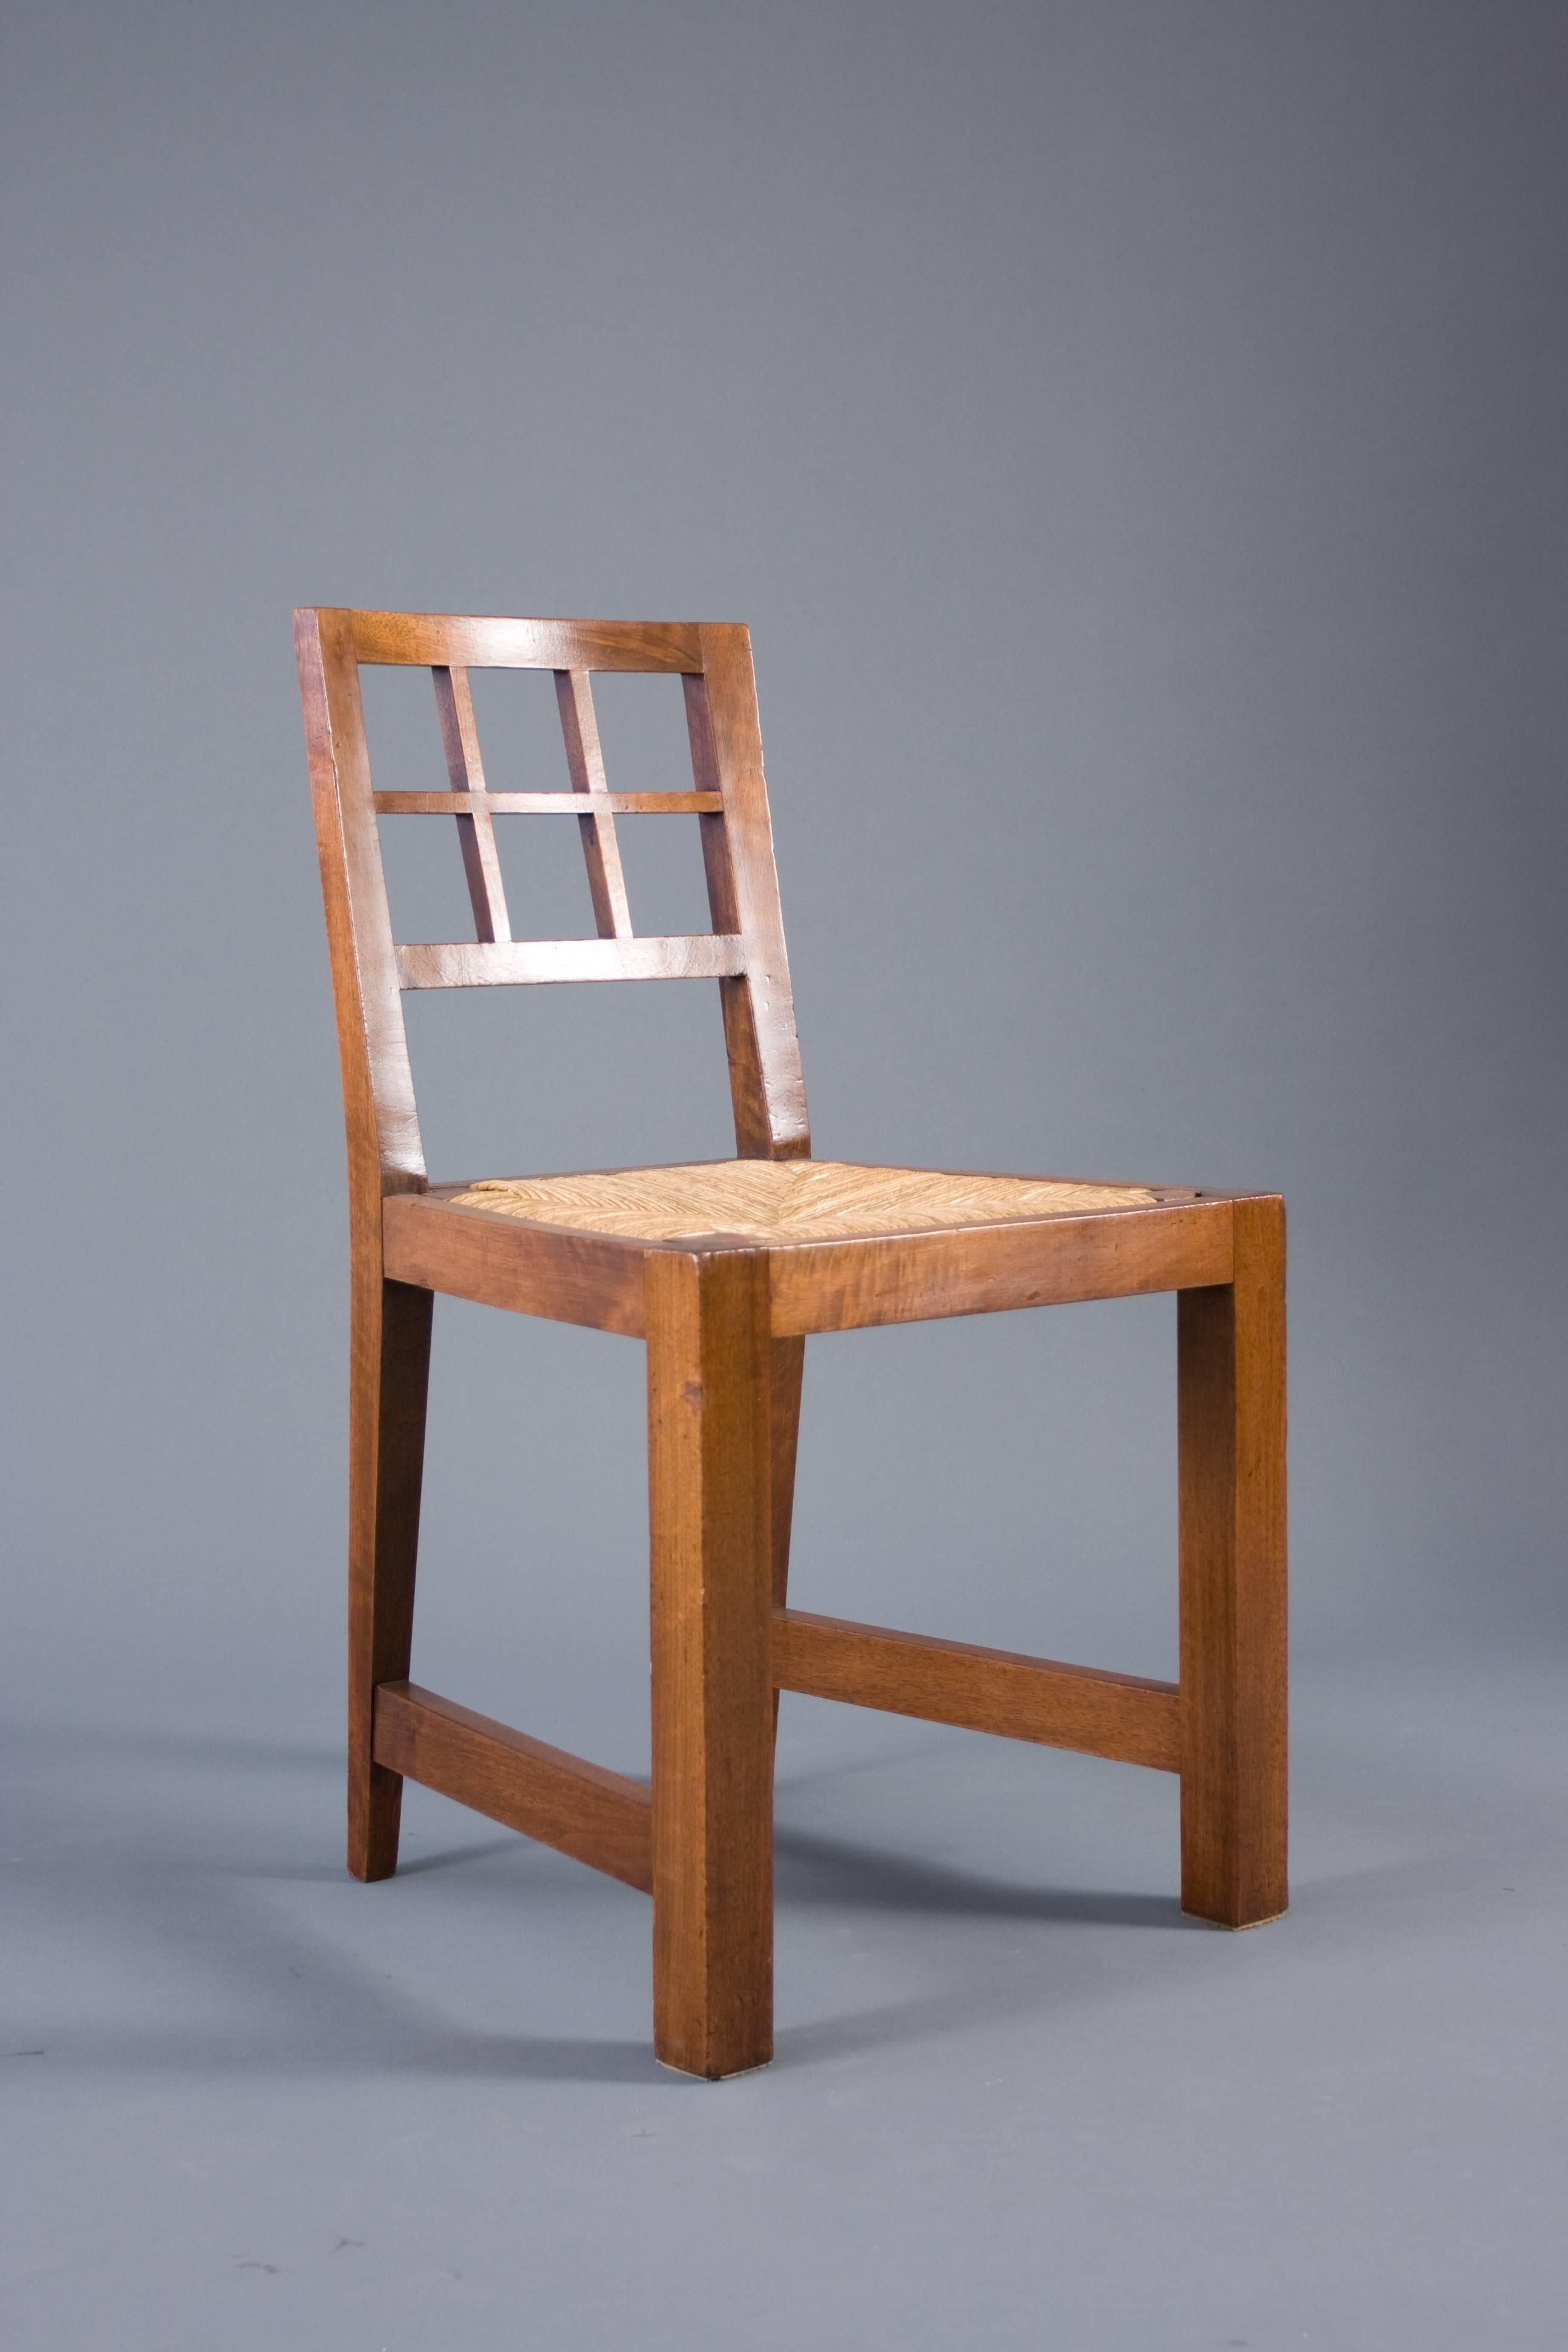 A set of six chairs (sold individually) with modernist lines typical of Francis Joirdain's work circa 1910-1920. Removable wicker seat. $1200.00 per chair.